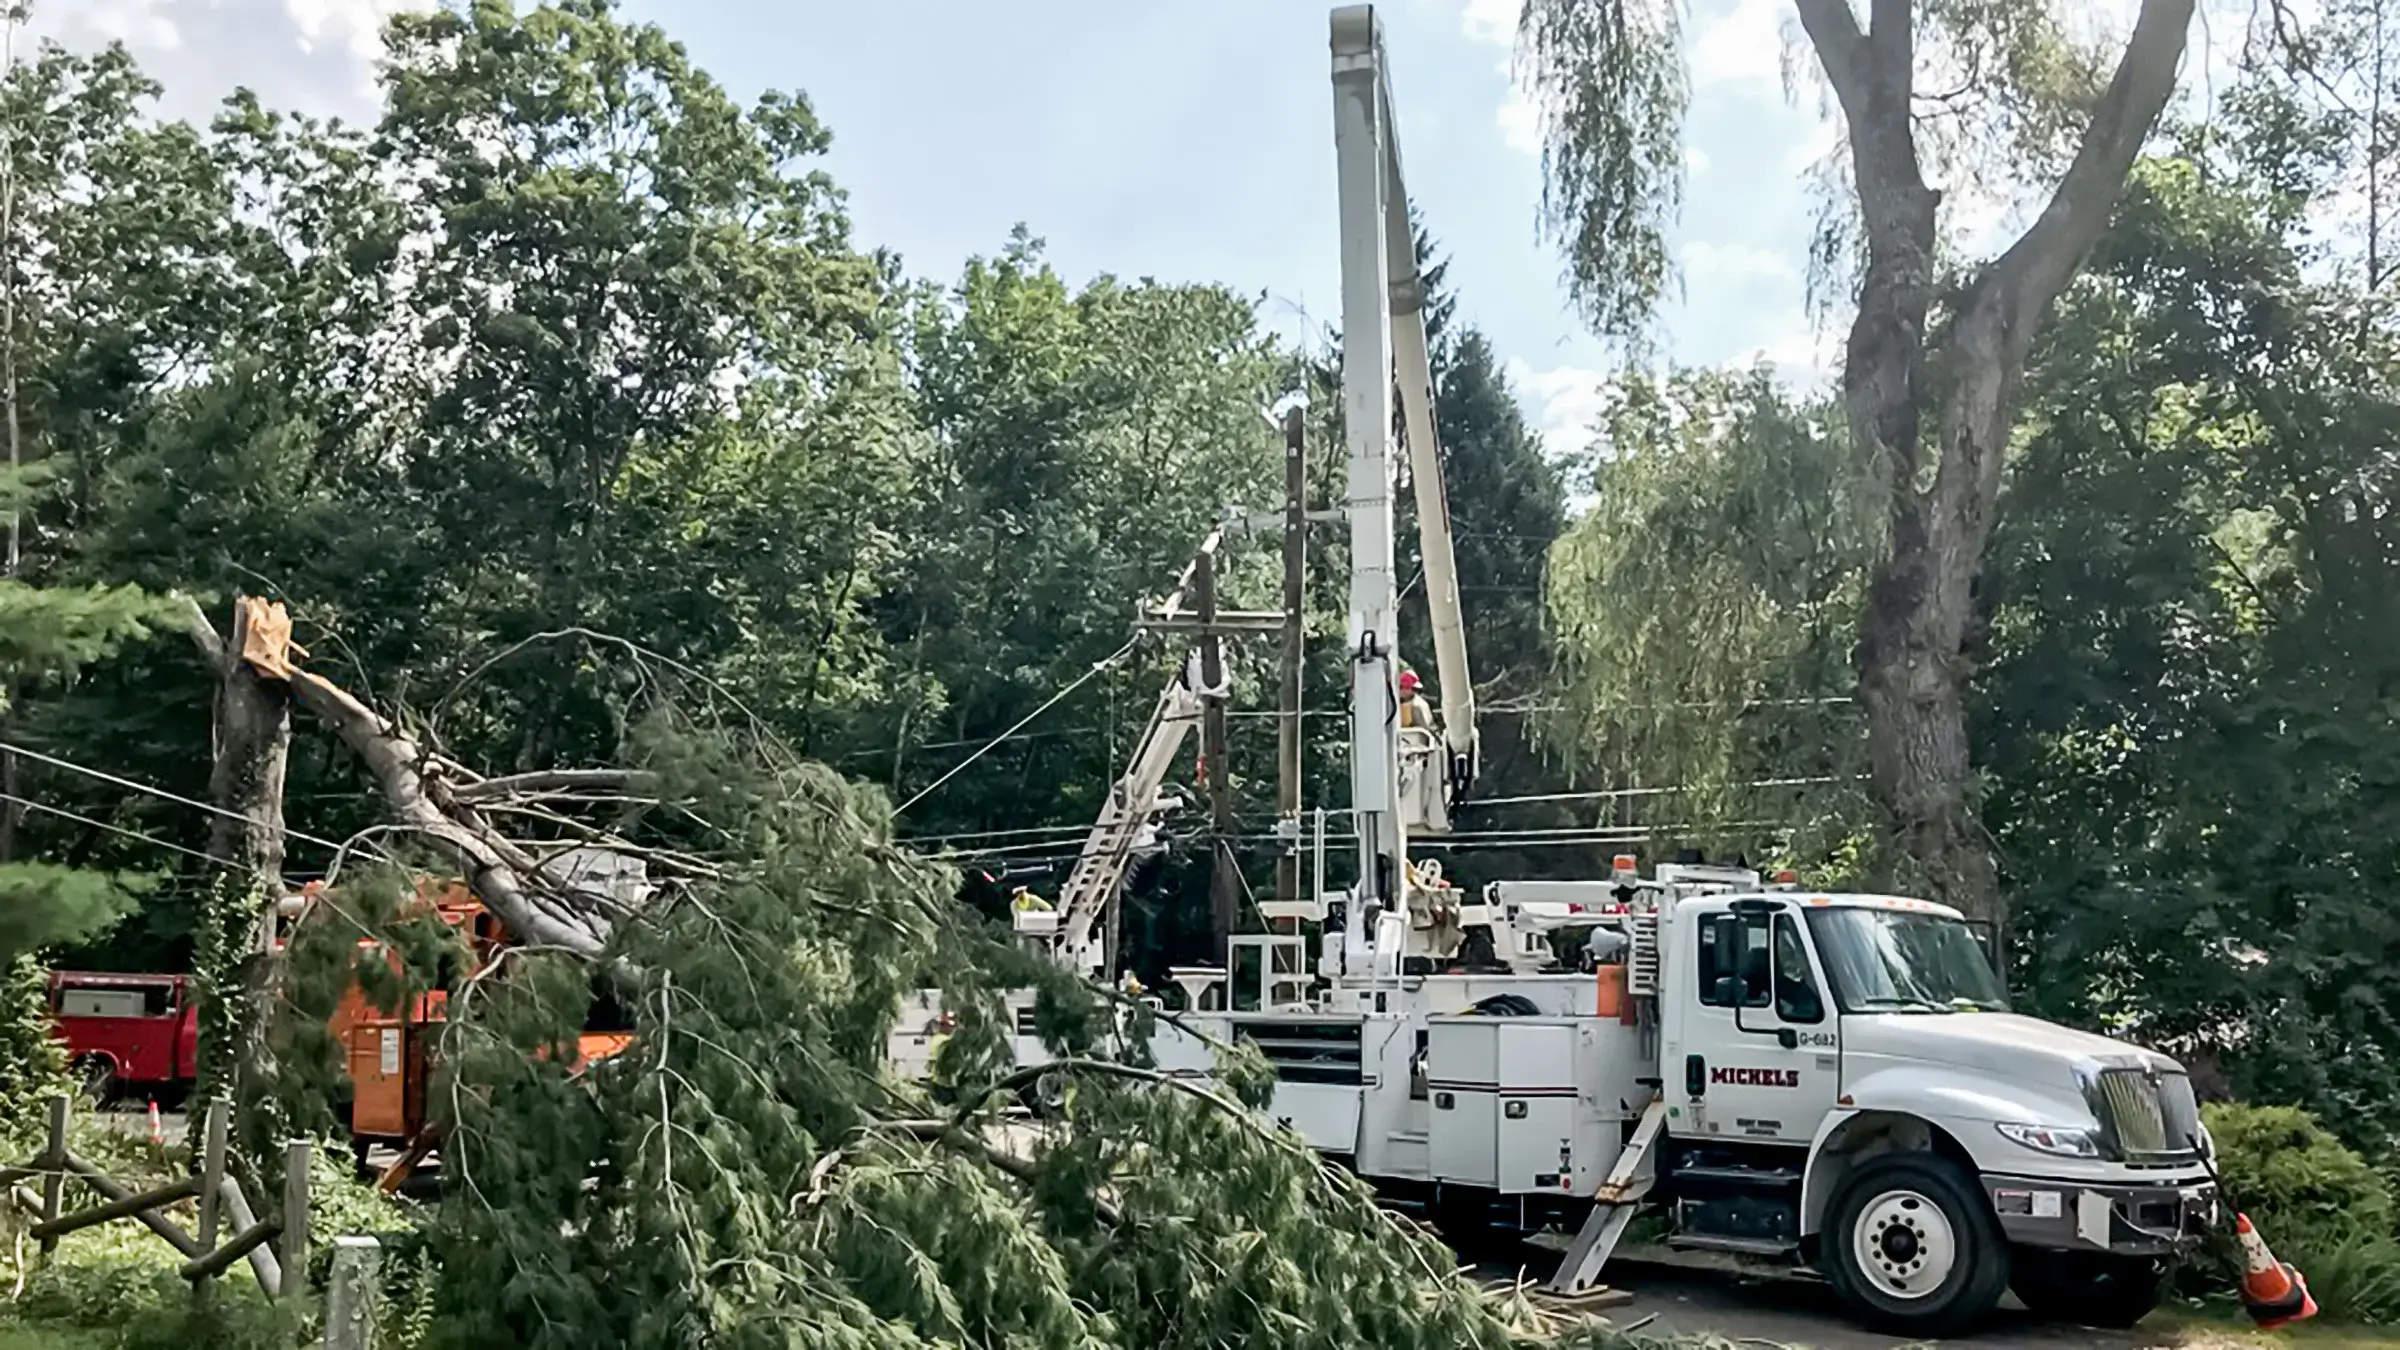 Michels Power, Inc. aids in disaster relief after a tree fell on a power line.